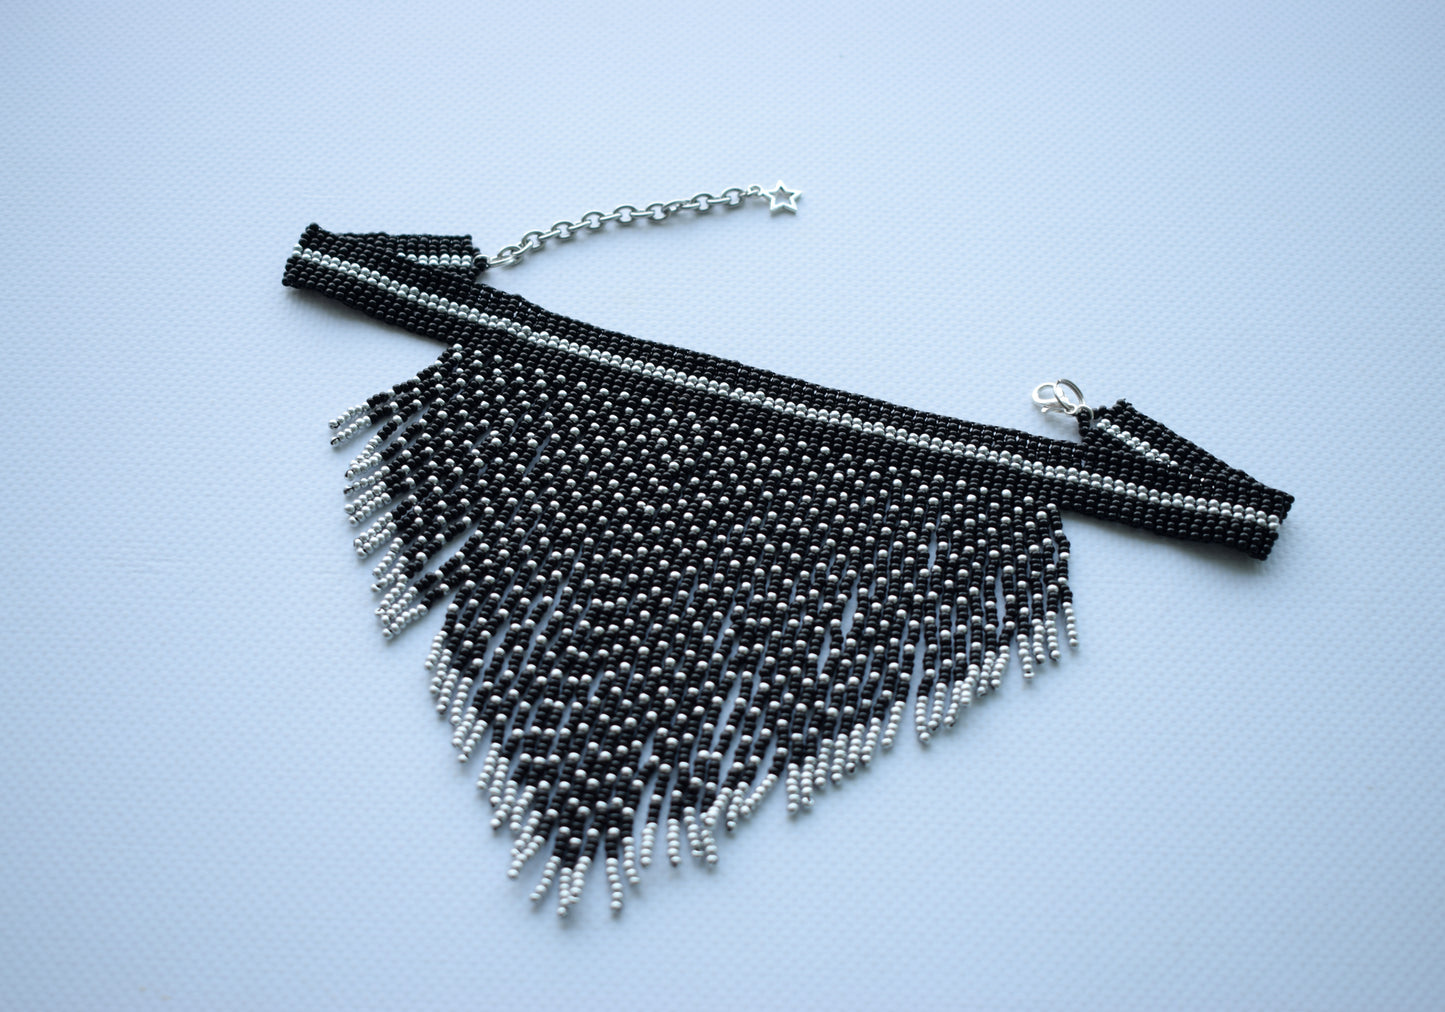 This is black and silver necklace with fringe. This beaded necklace is made of high-quality Czech beads. This necklace is exquisite and fashionable.  Completely handmade❤️  Length (neck girth) - 30 cm+chain (11.8 inches+chain). Length (beadwork part+fringe) - 12.5 cm (4.9 inches).  Message me if you need custom colors.  If you have any questions just write me a message. I am always in touch and reply asap!